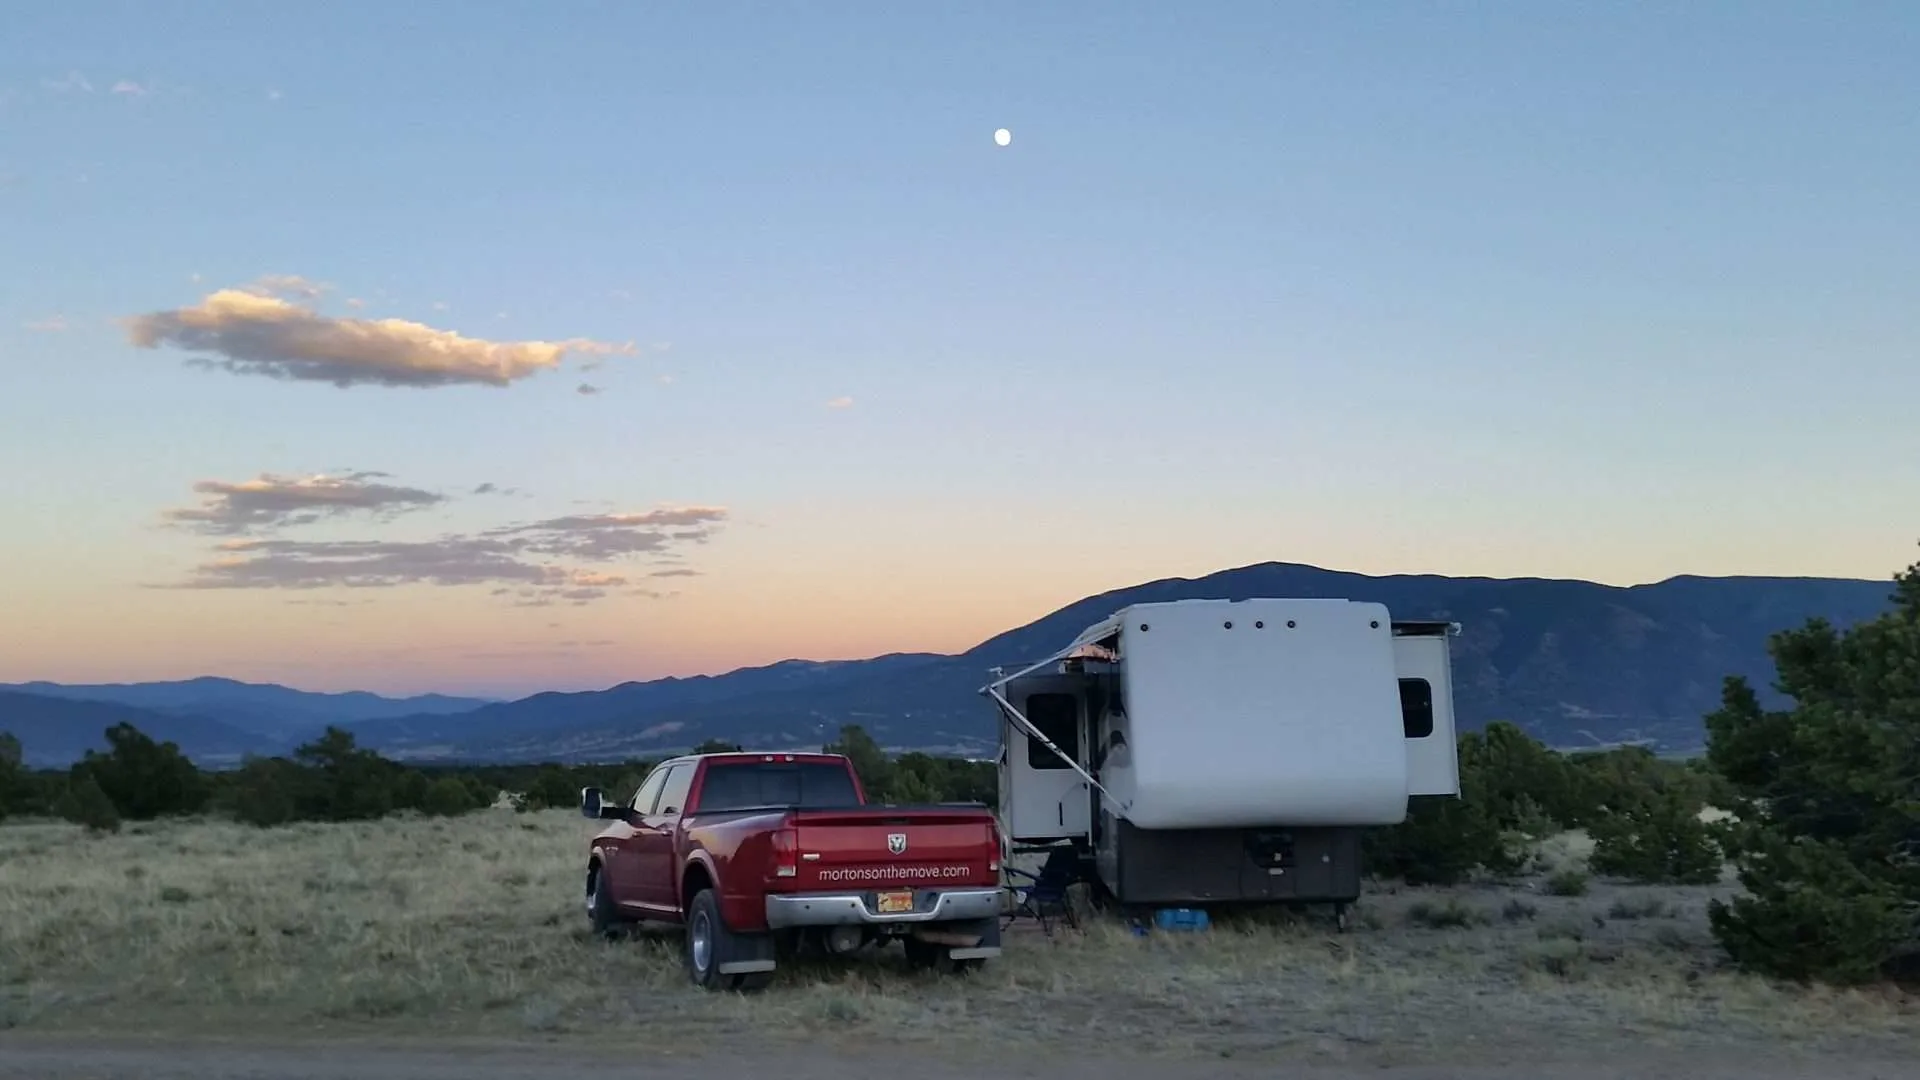 Mortons on the Move RV dry camping at sunset